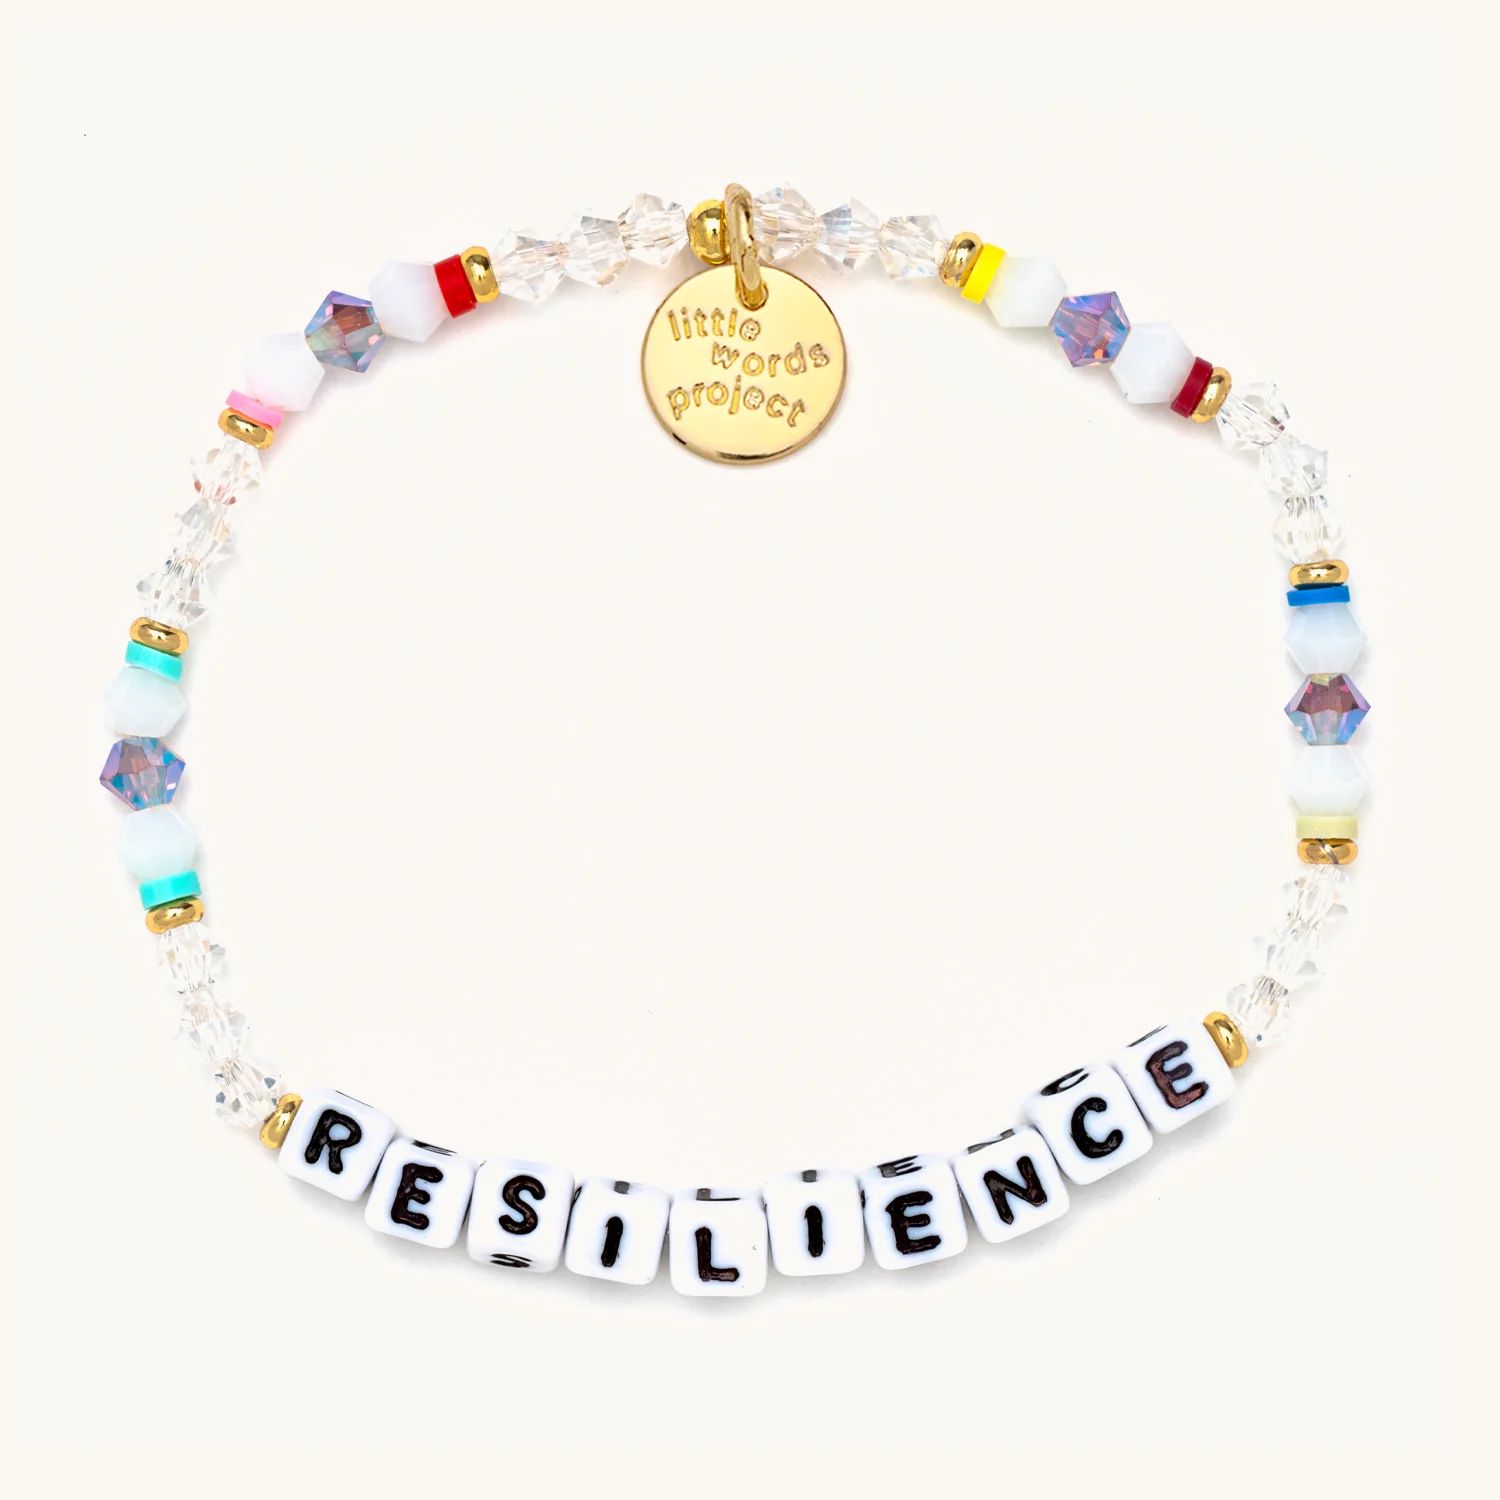 Resilience- Best Of | Little Words Project